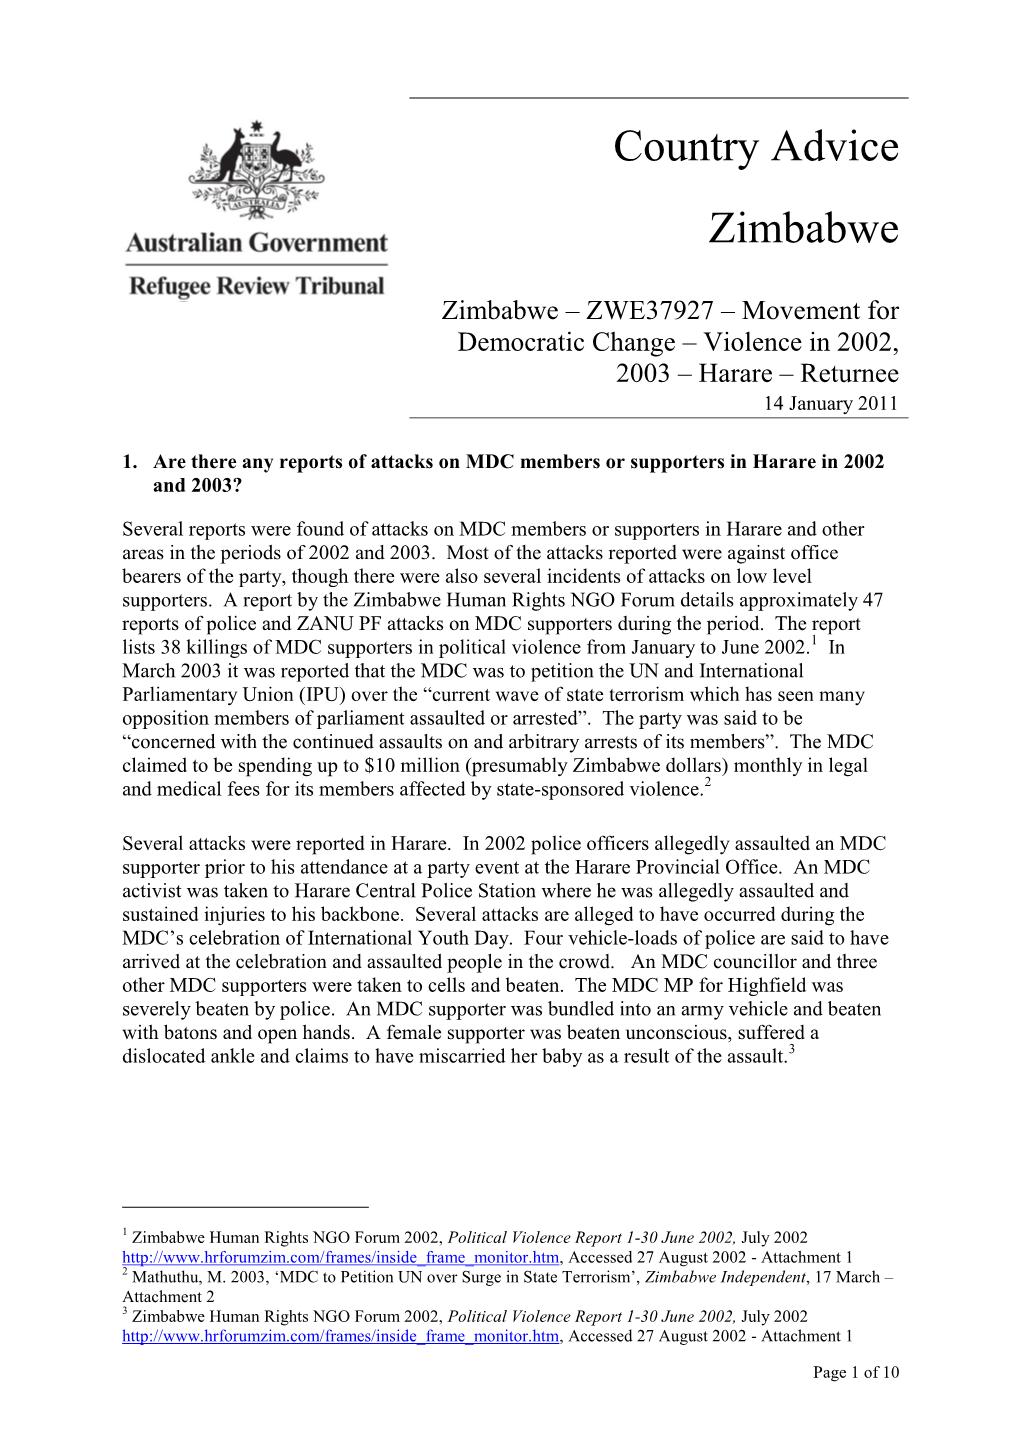 Movement for Democratic Change – Violence in 2002, 2003 – Harare – Returnee 14 January 2011